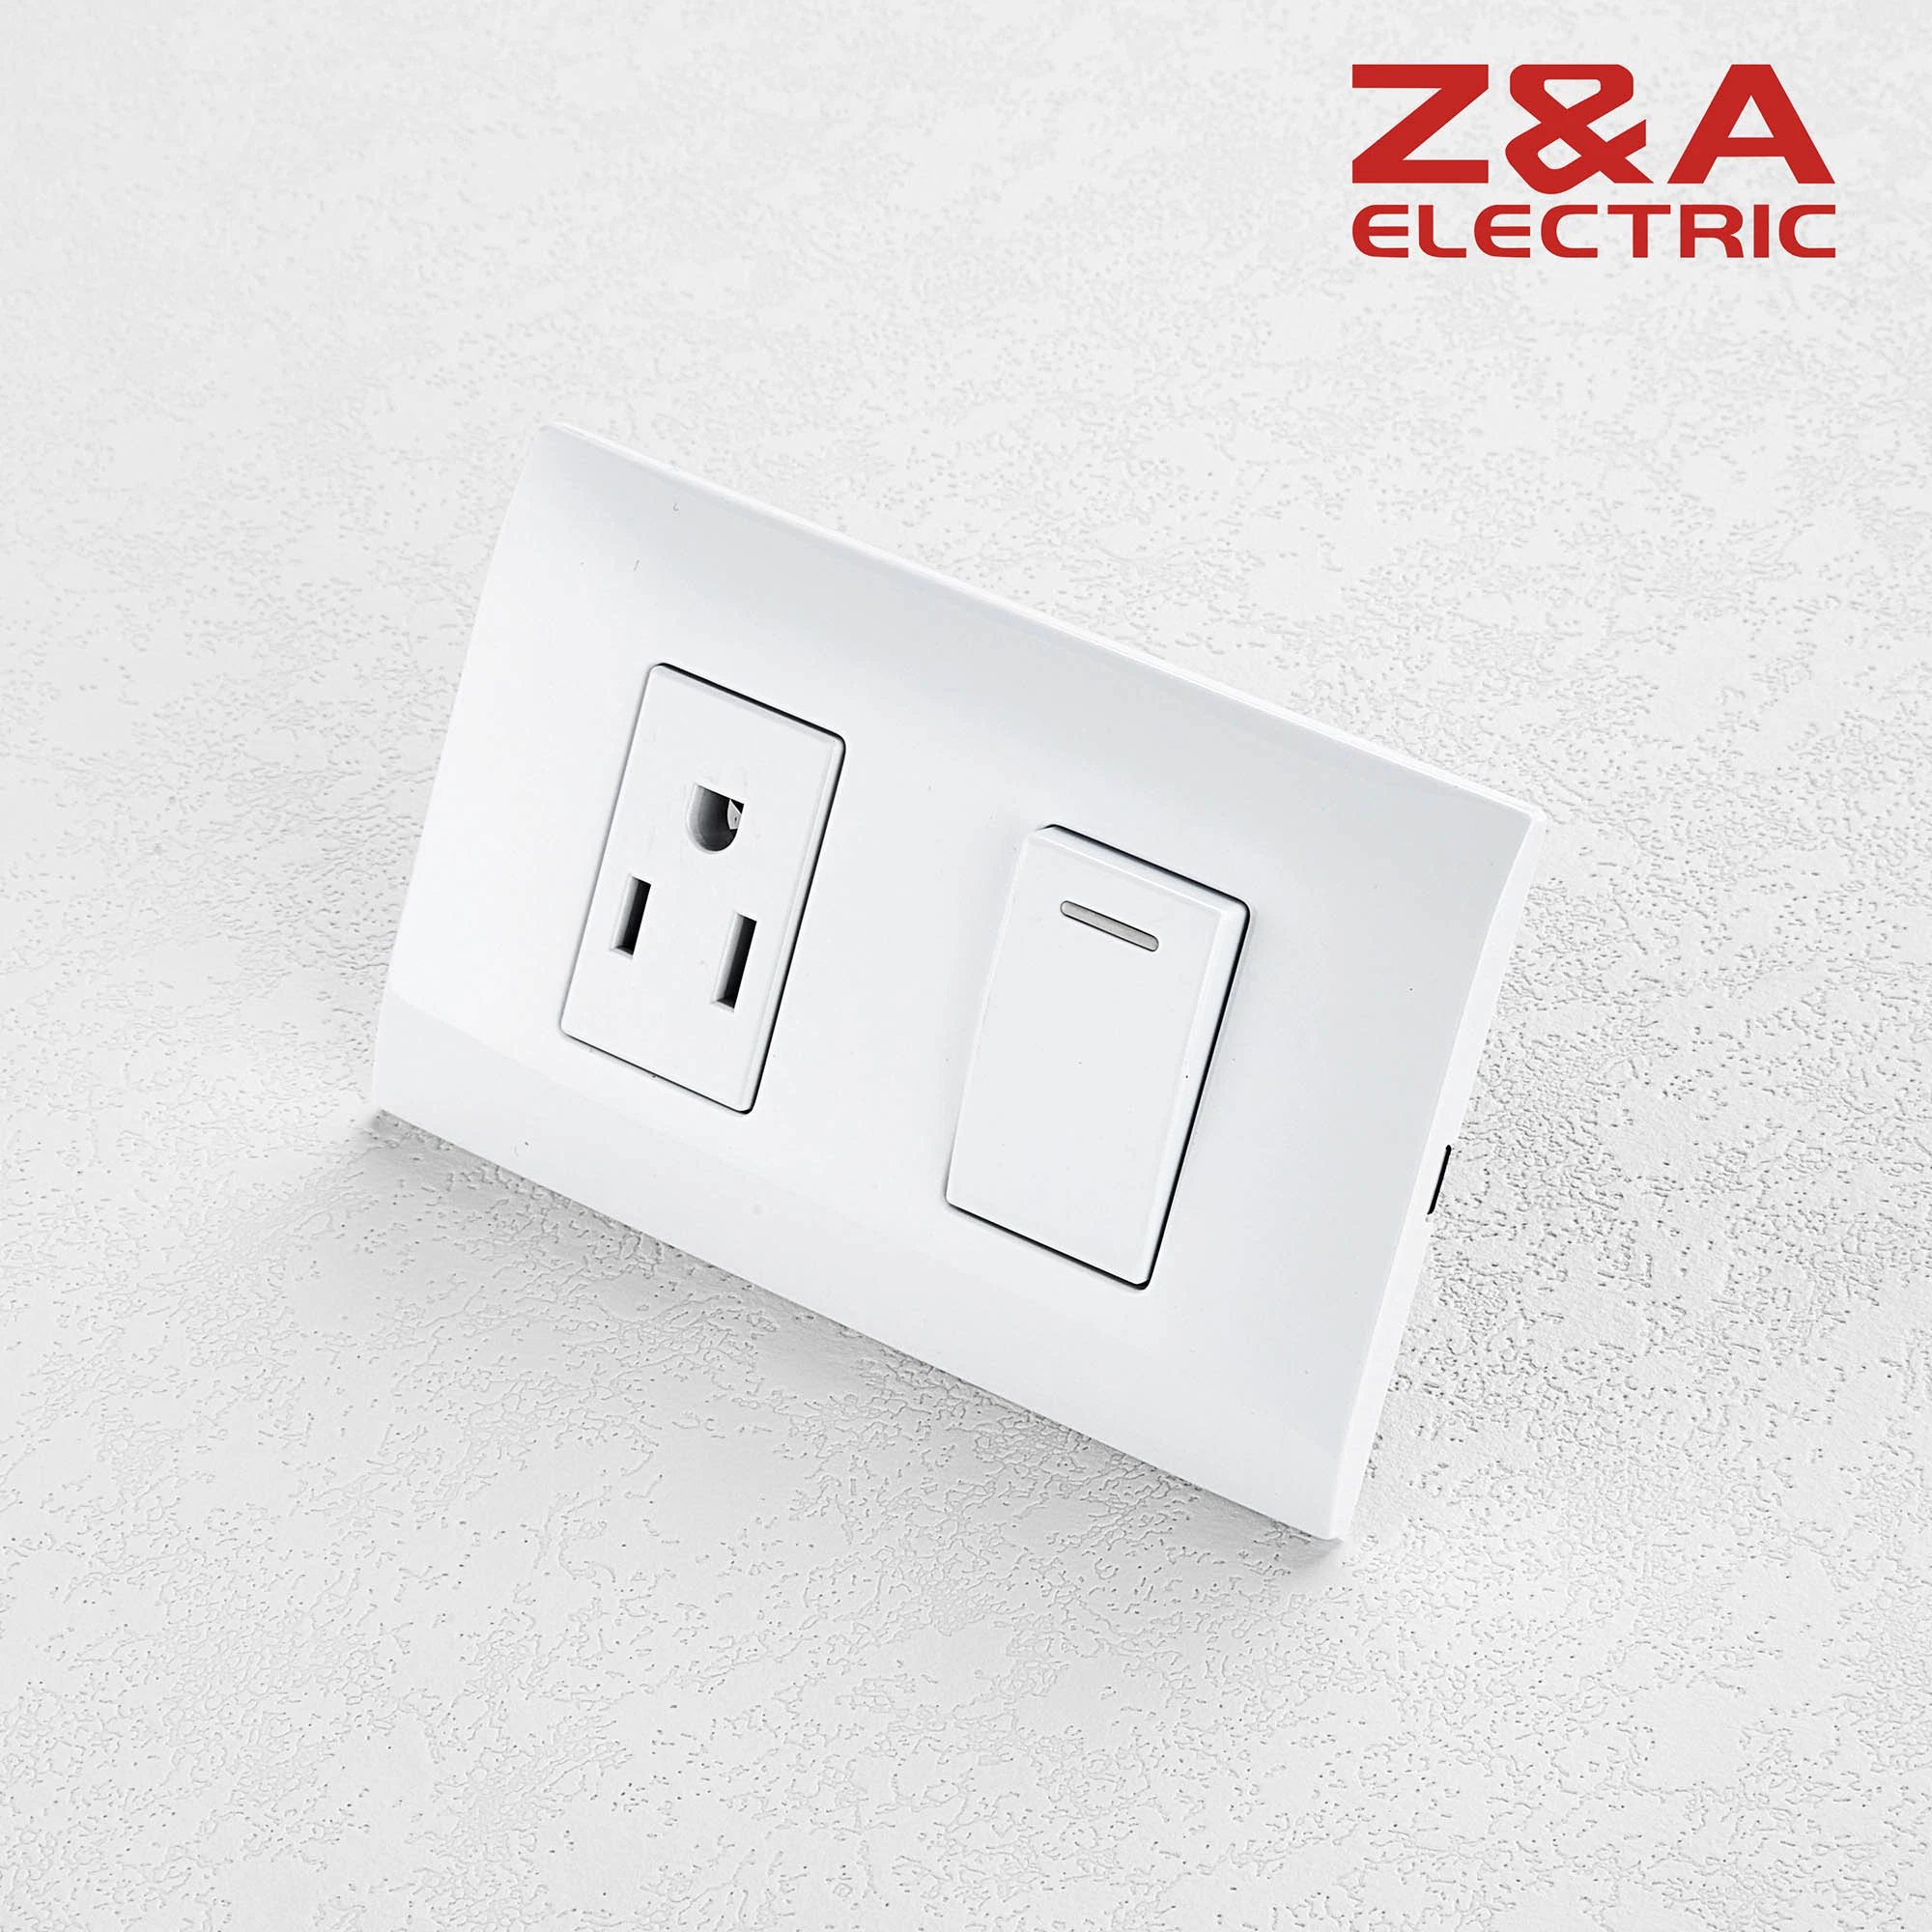 Electric Accessories PC Light Home Wall Switch and Socket for Different Color